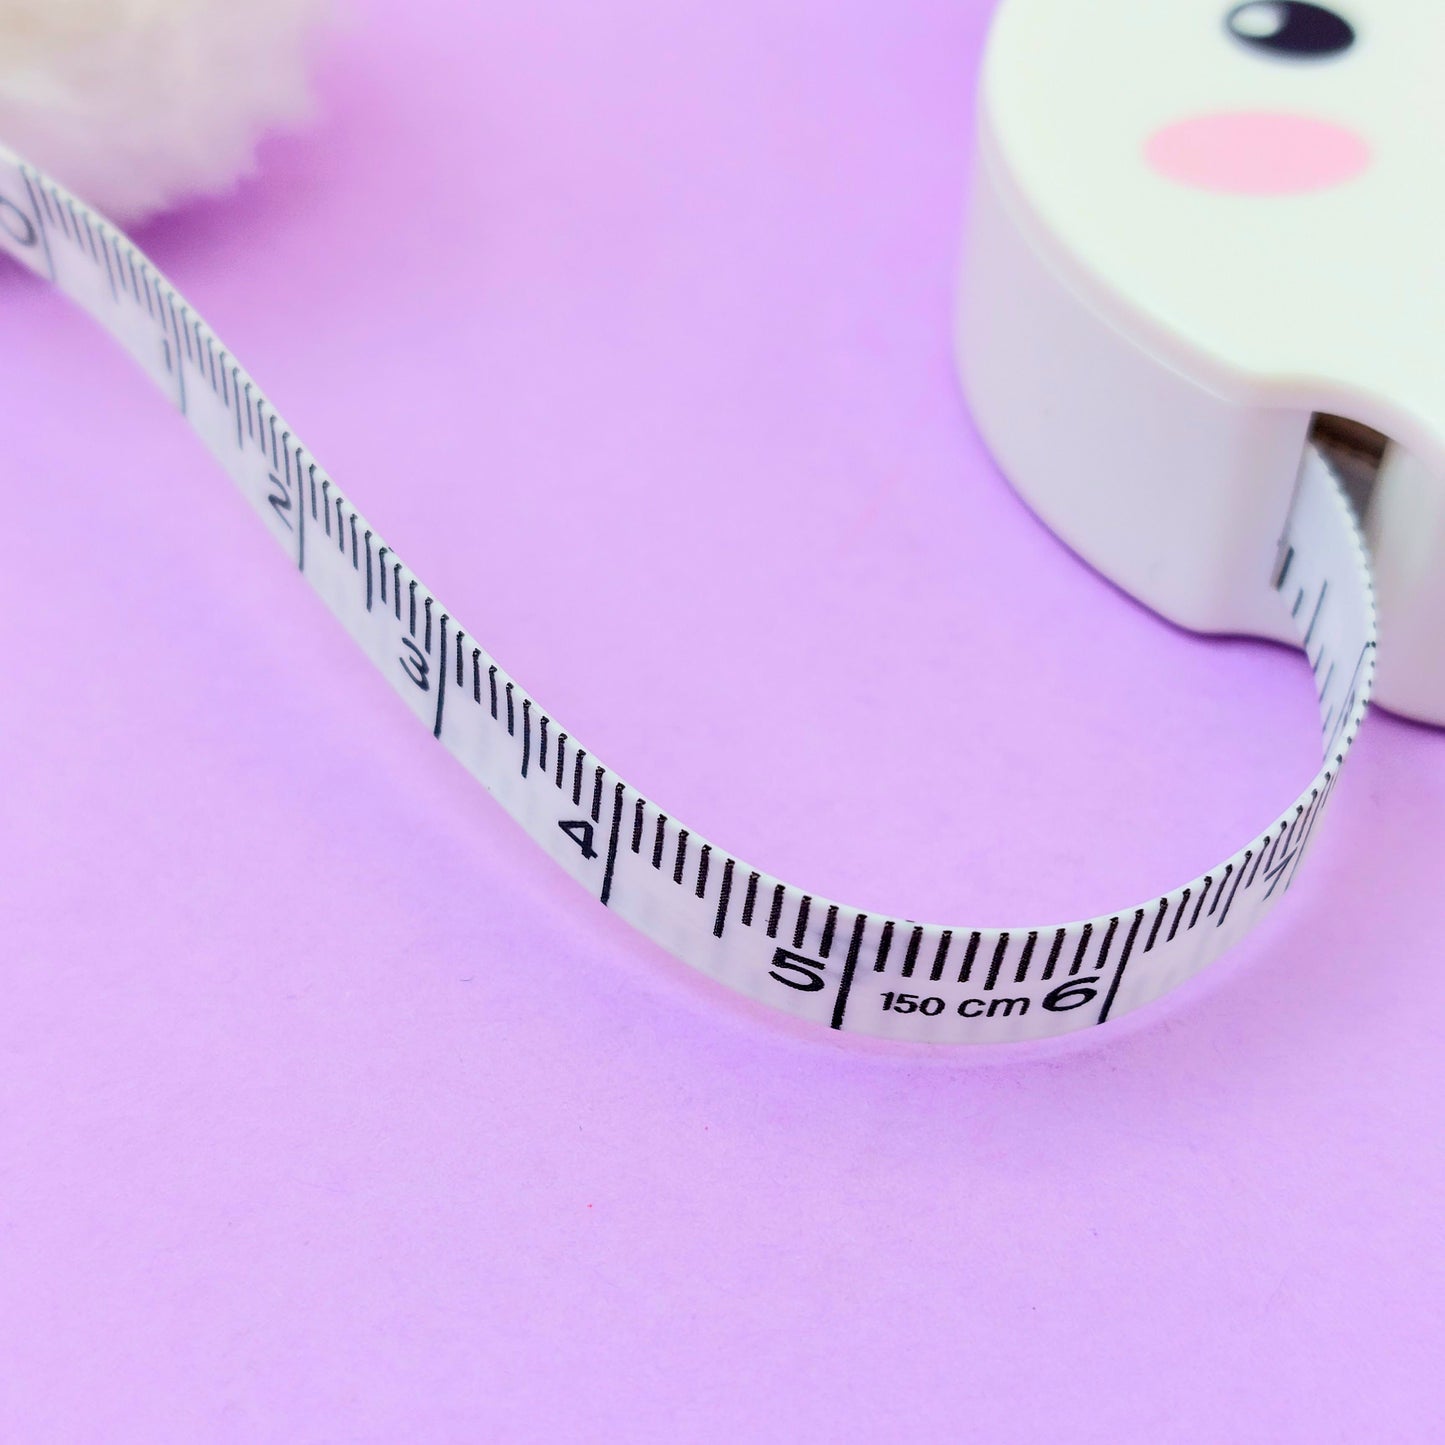 Adorable Animal Tape Measure with fluffy pompom tail